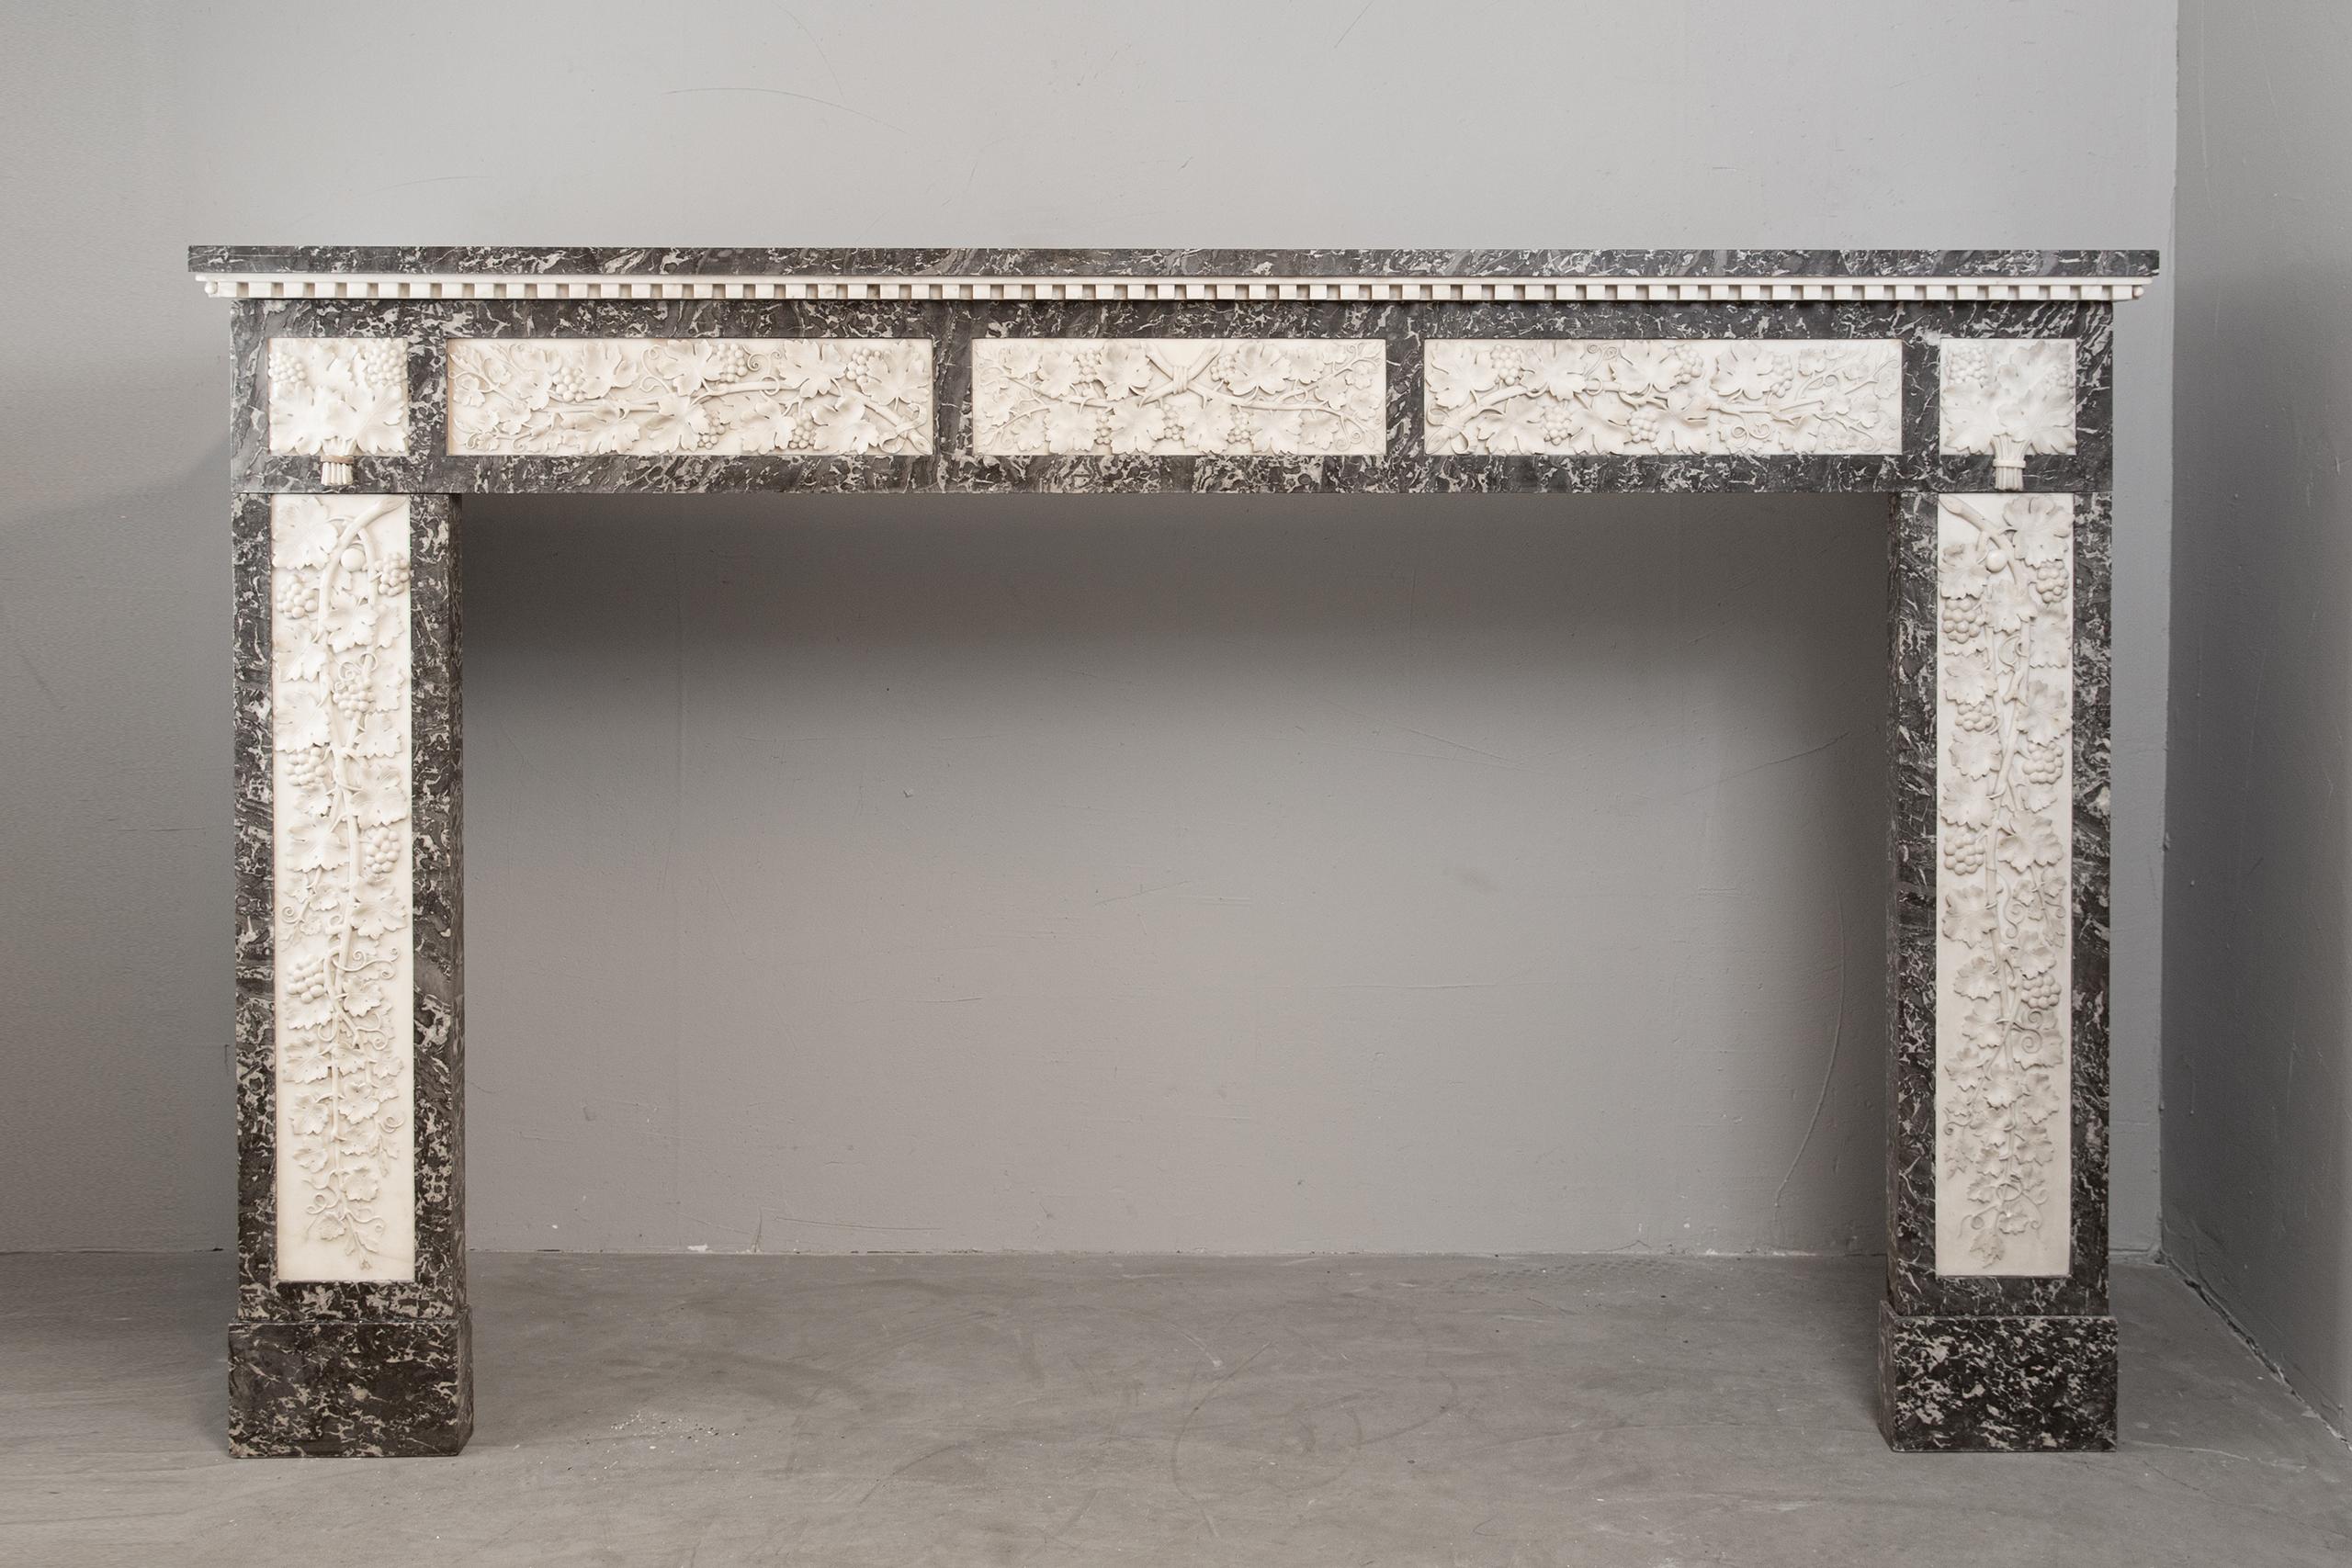 This Antique Louis XVI period fireplace in carrara and gray marble decorated with grapevines and grapes.
This fireplace is in very good condition. With its richness and decoration with hewn grapes and grape branches is an absolute centerpiece in